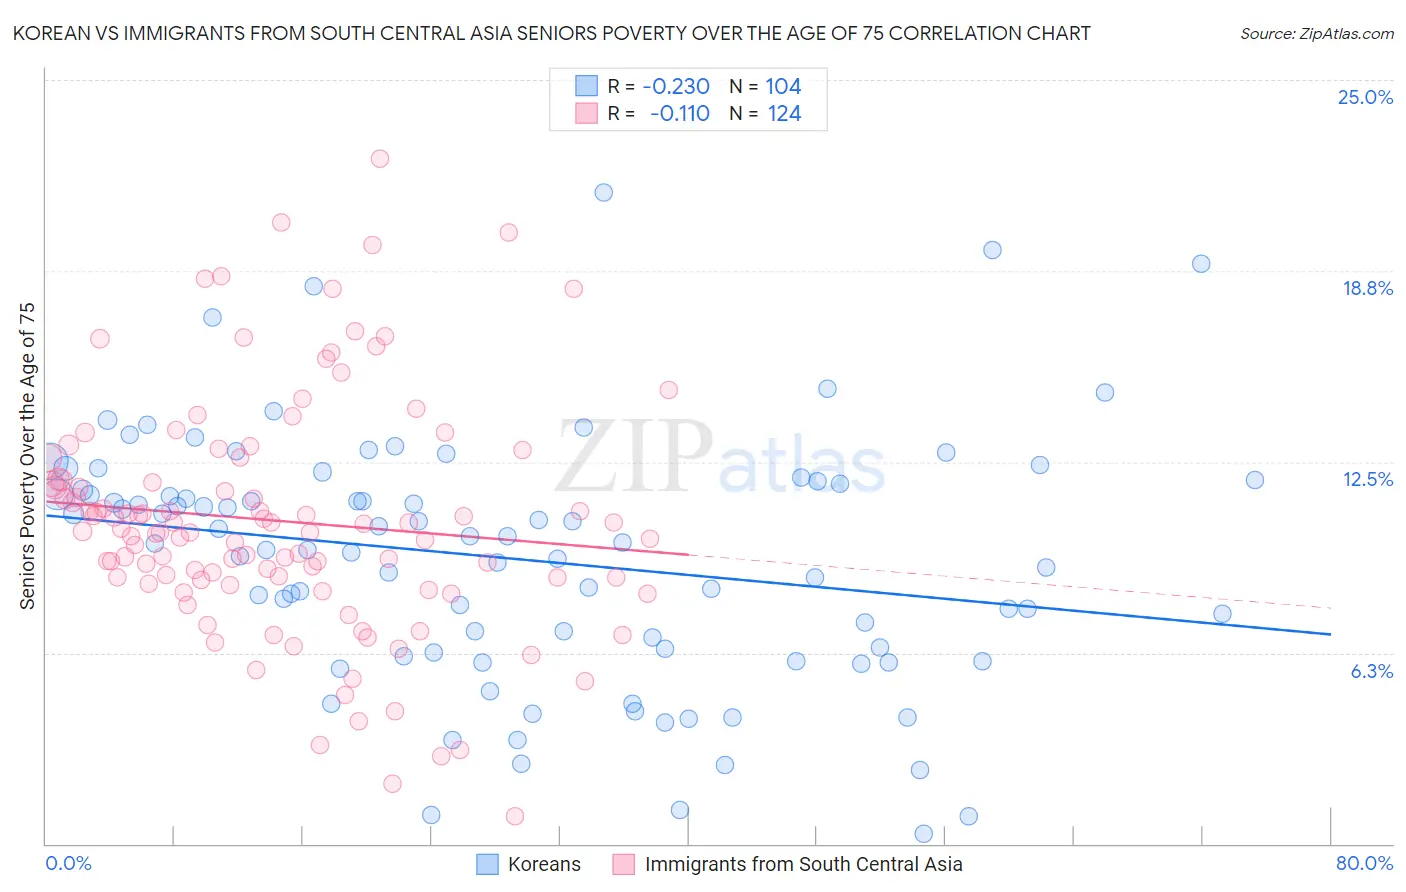 Korean vs Immigrants from South Central Asia Seniors Poverty Over the Age of 75